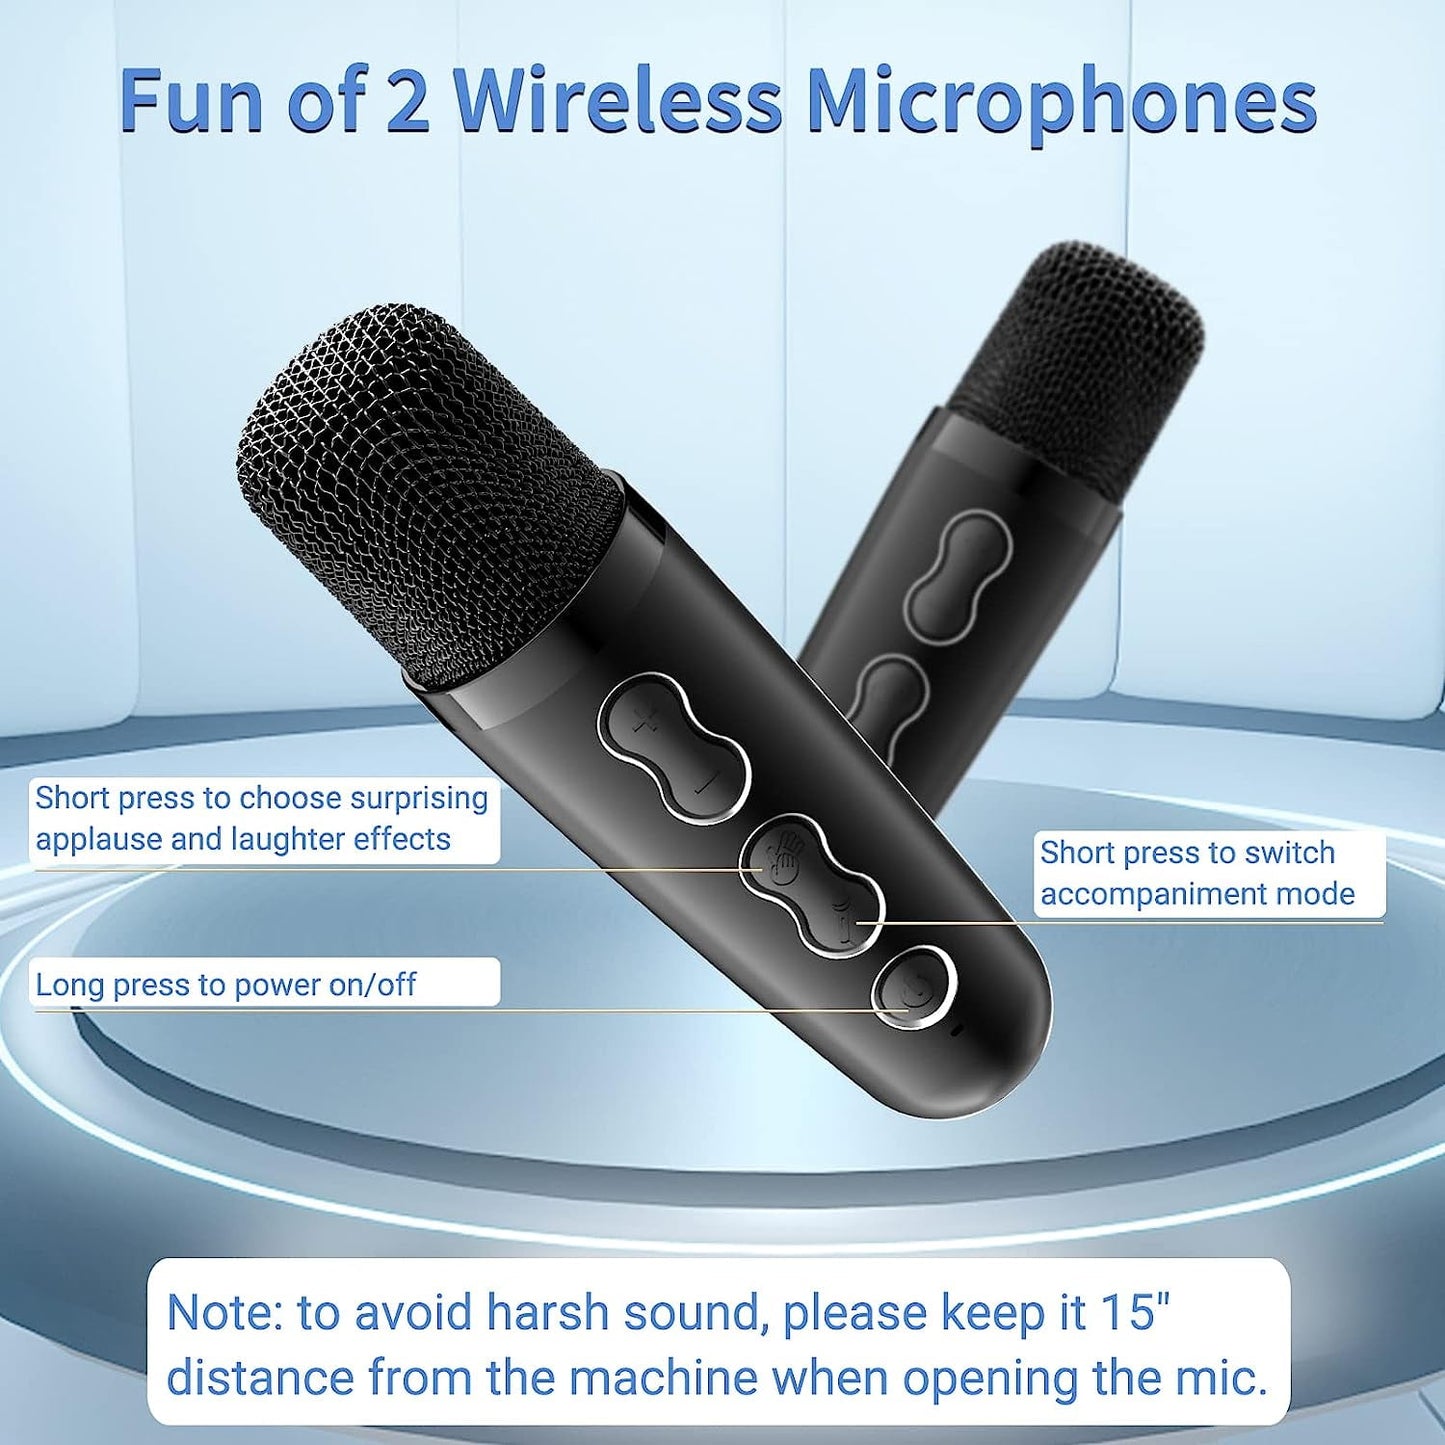 BONAOK Karaoke Machine with 2 Wireless Microphones, Portable Bluetooth Speaker for Adults Kids, with Dynamic Lights, Ideal Gifts for Girls Boys Home Party(Black)